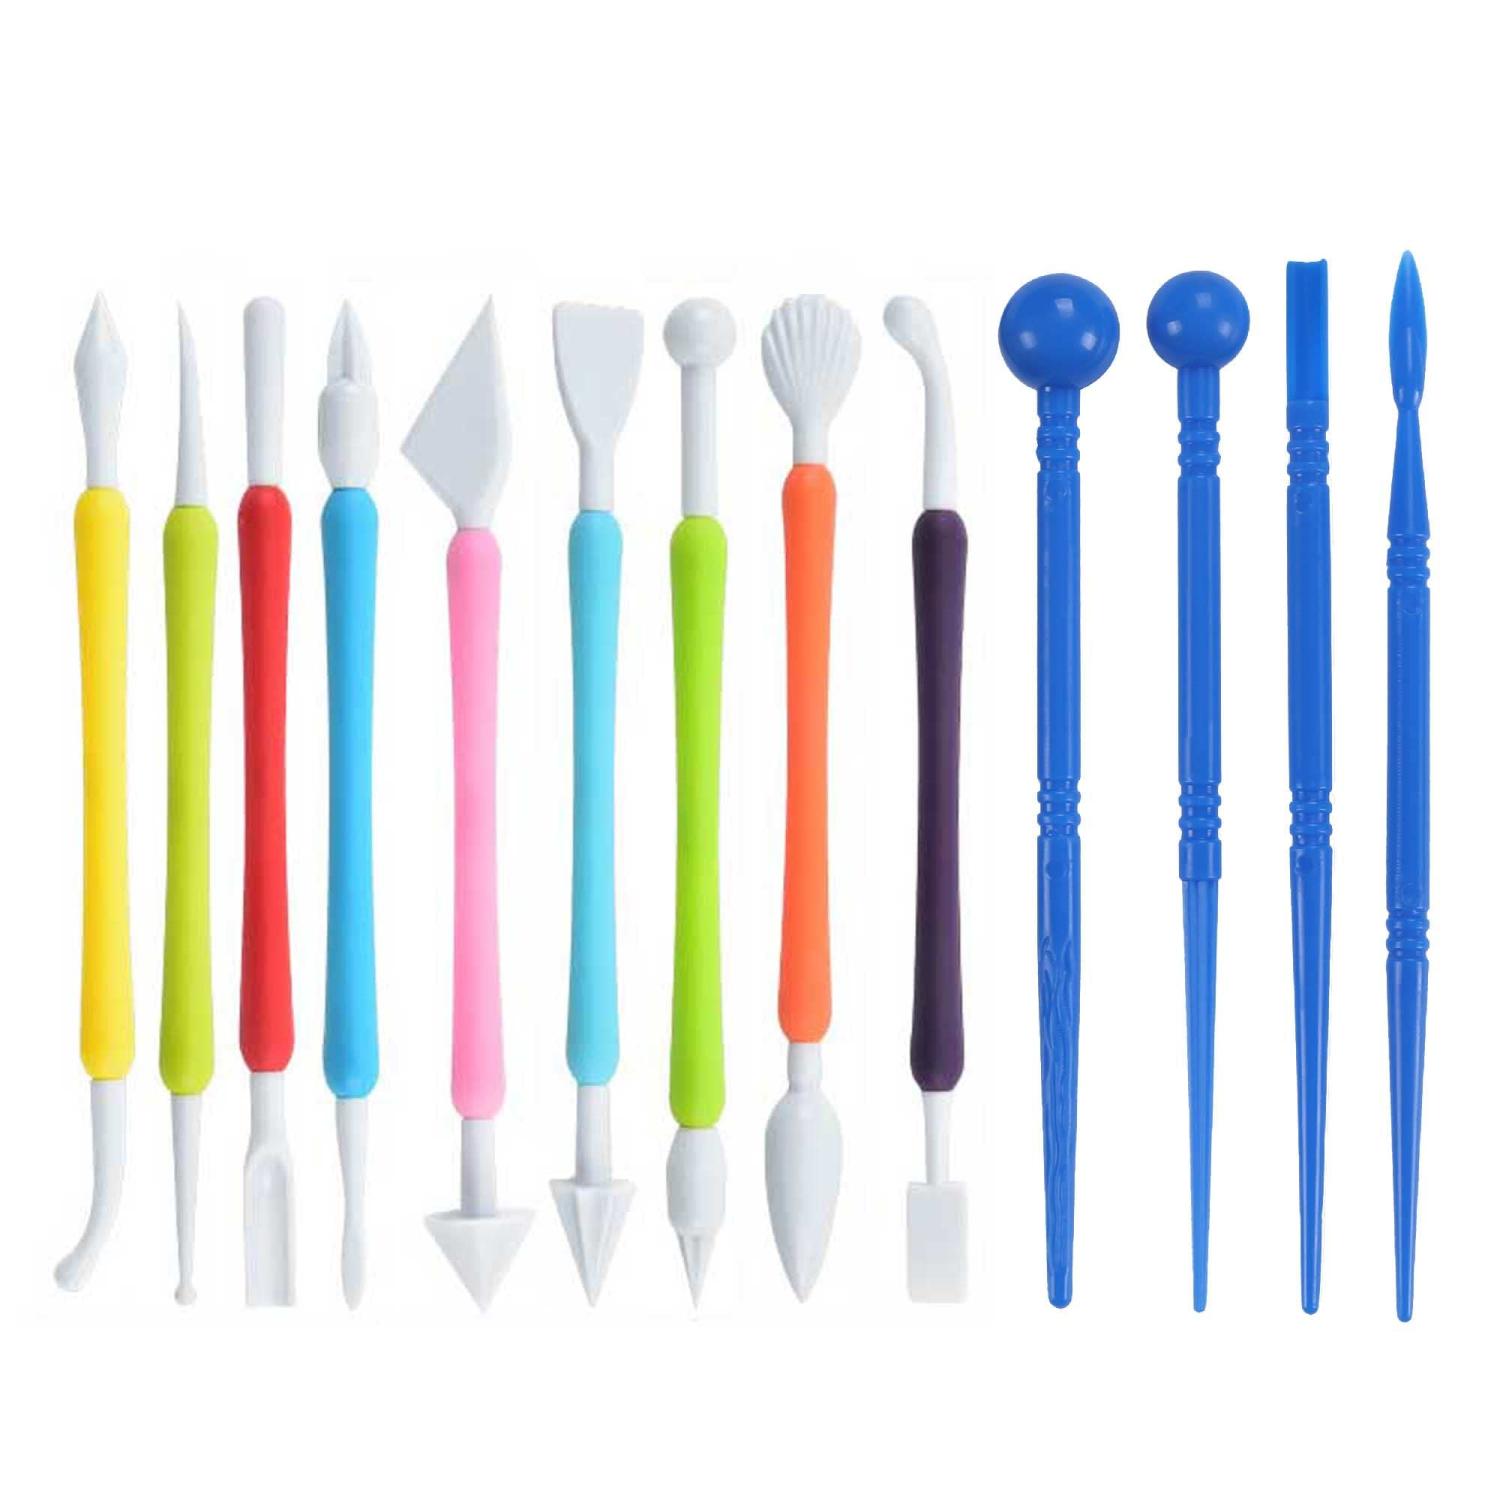 Langqun Plastic Clay Sculpting Tools 13Pcs Polymer Clay Supplies for  Modeling and Carving Pottery Tools Kit for Kids